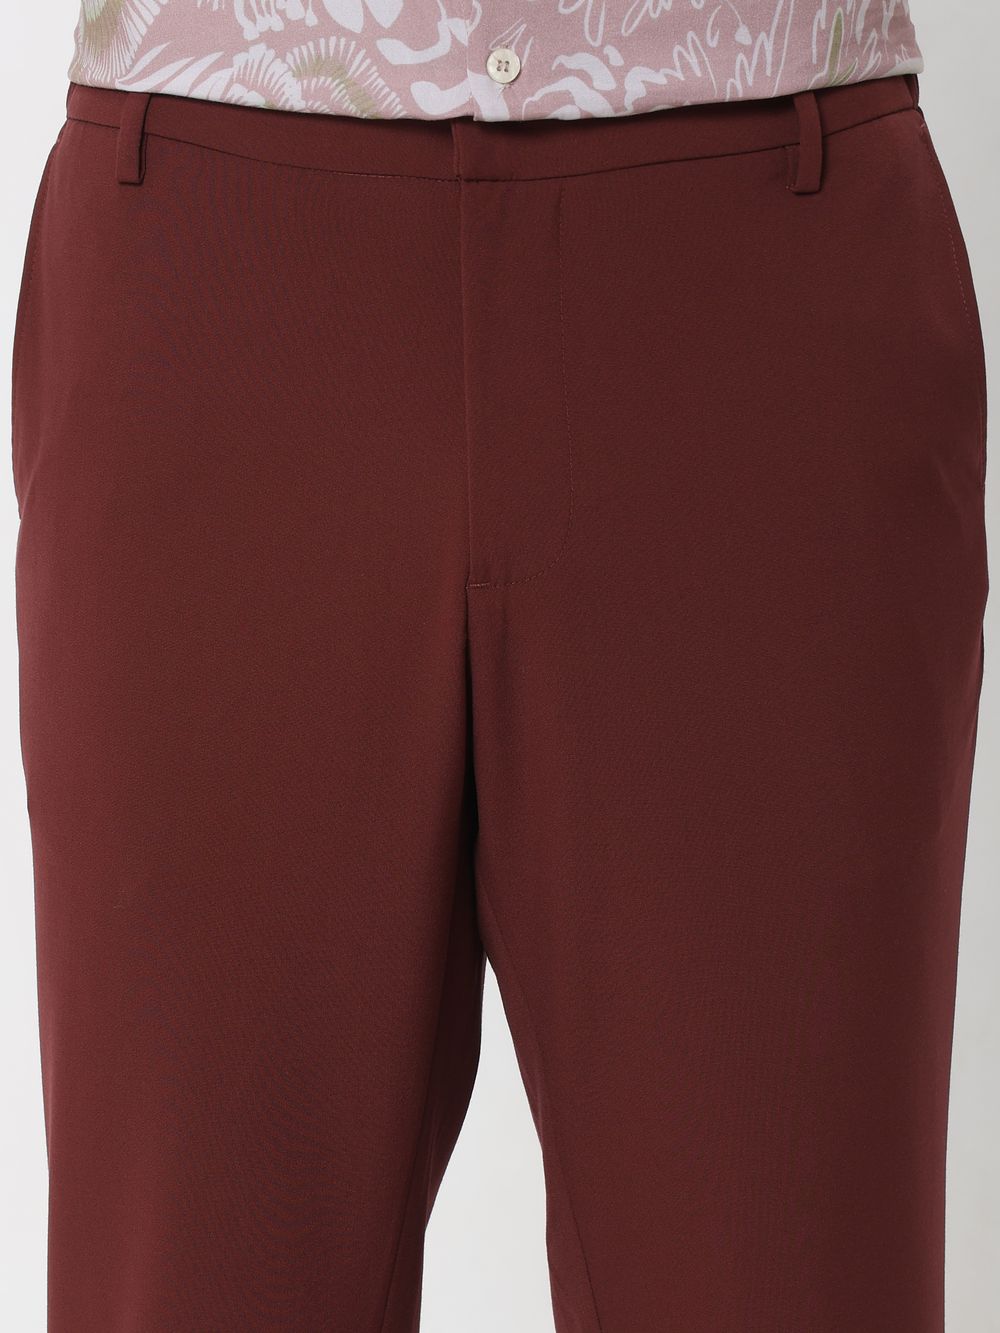 Rust Ankle Length Stretch Chinos